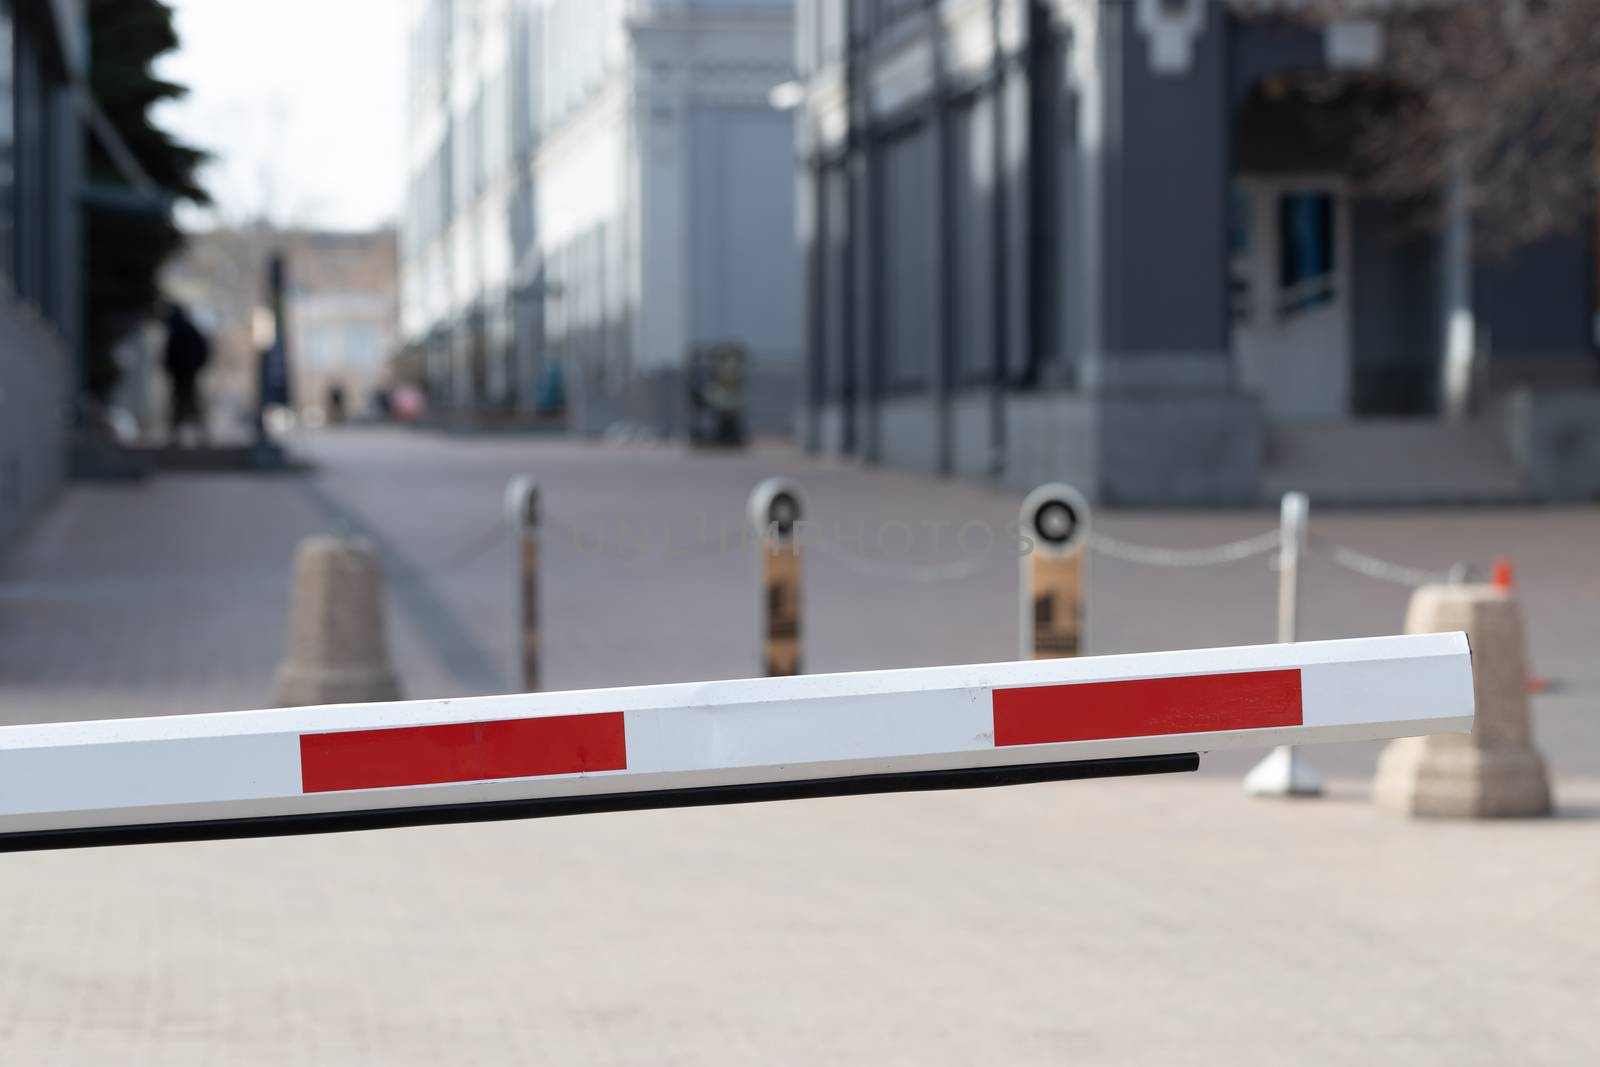 Automatic security metal barrier boom closed for stop and checking car entering to restricted area by bonilook